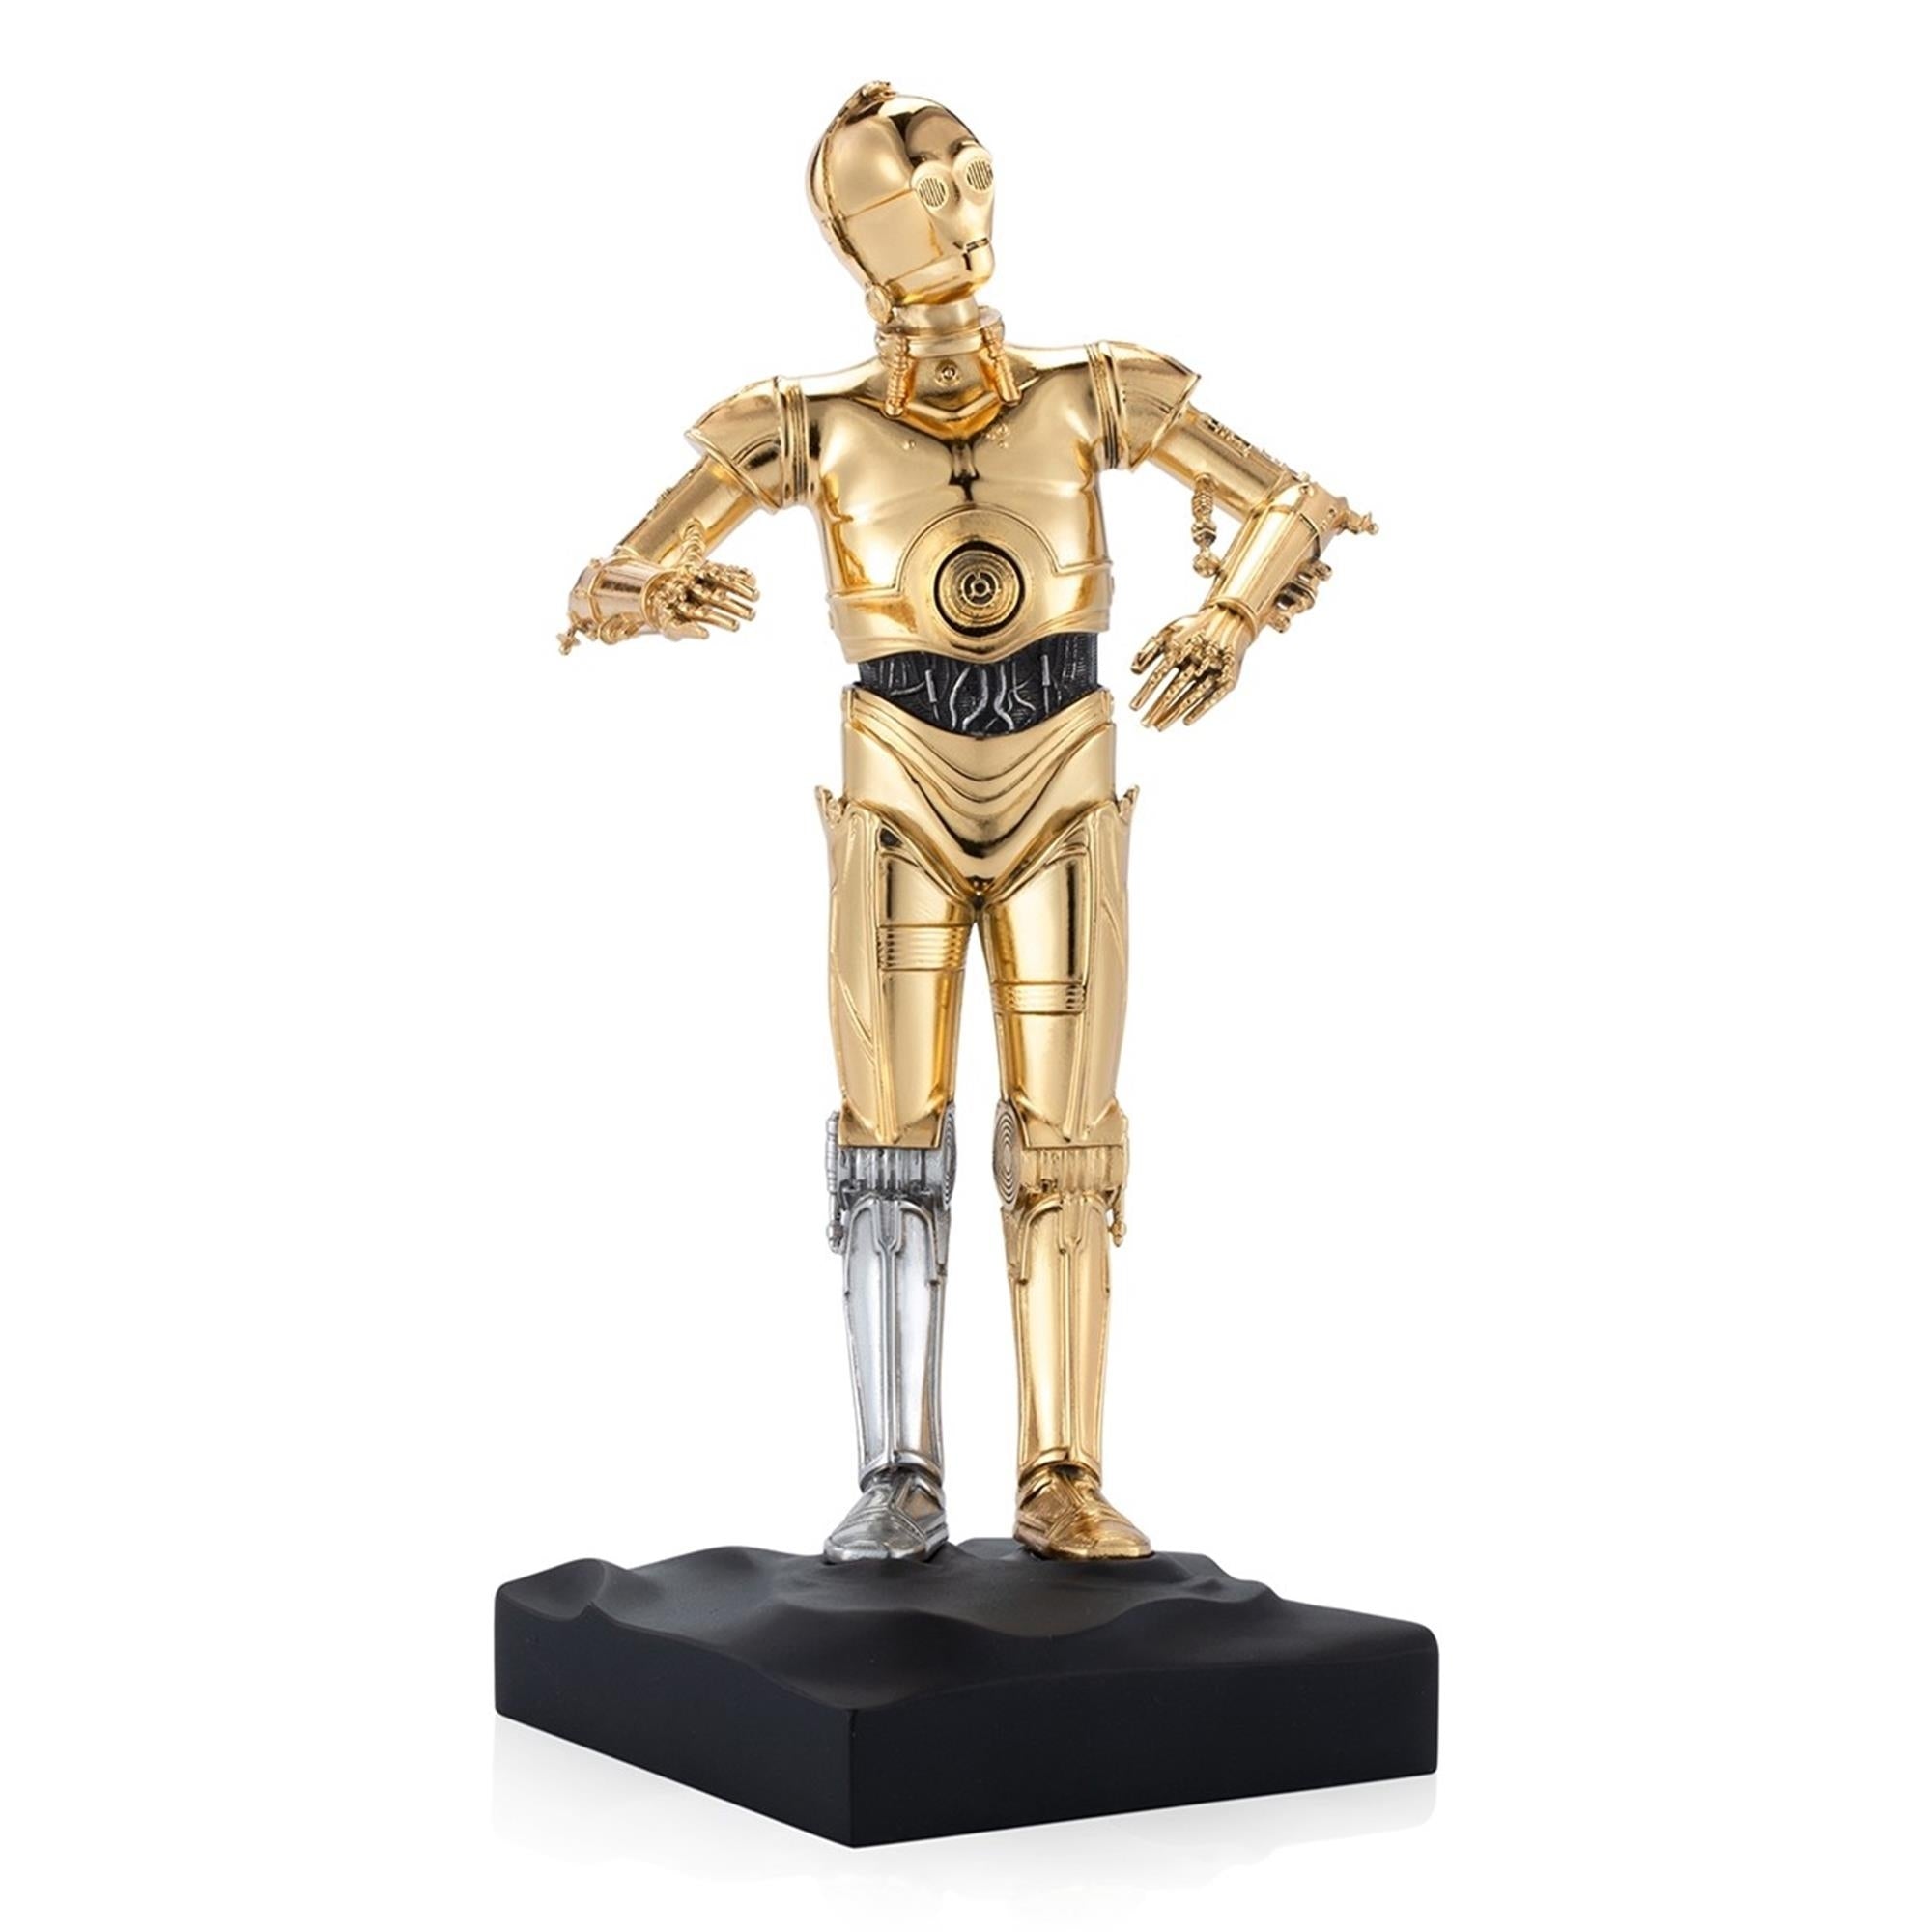 Star Wars By Royal Selangor 017927E LIMITED EDITION Gilt C-3P0 Figurine product